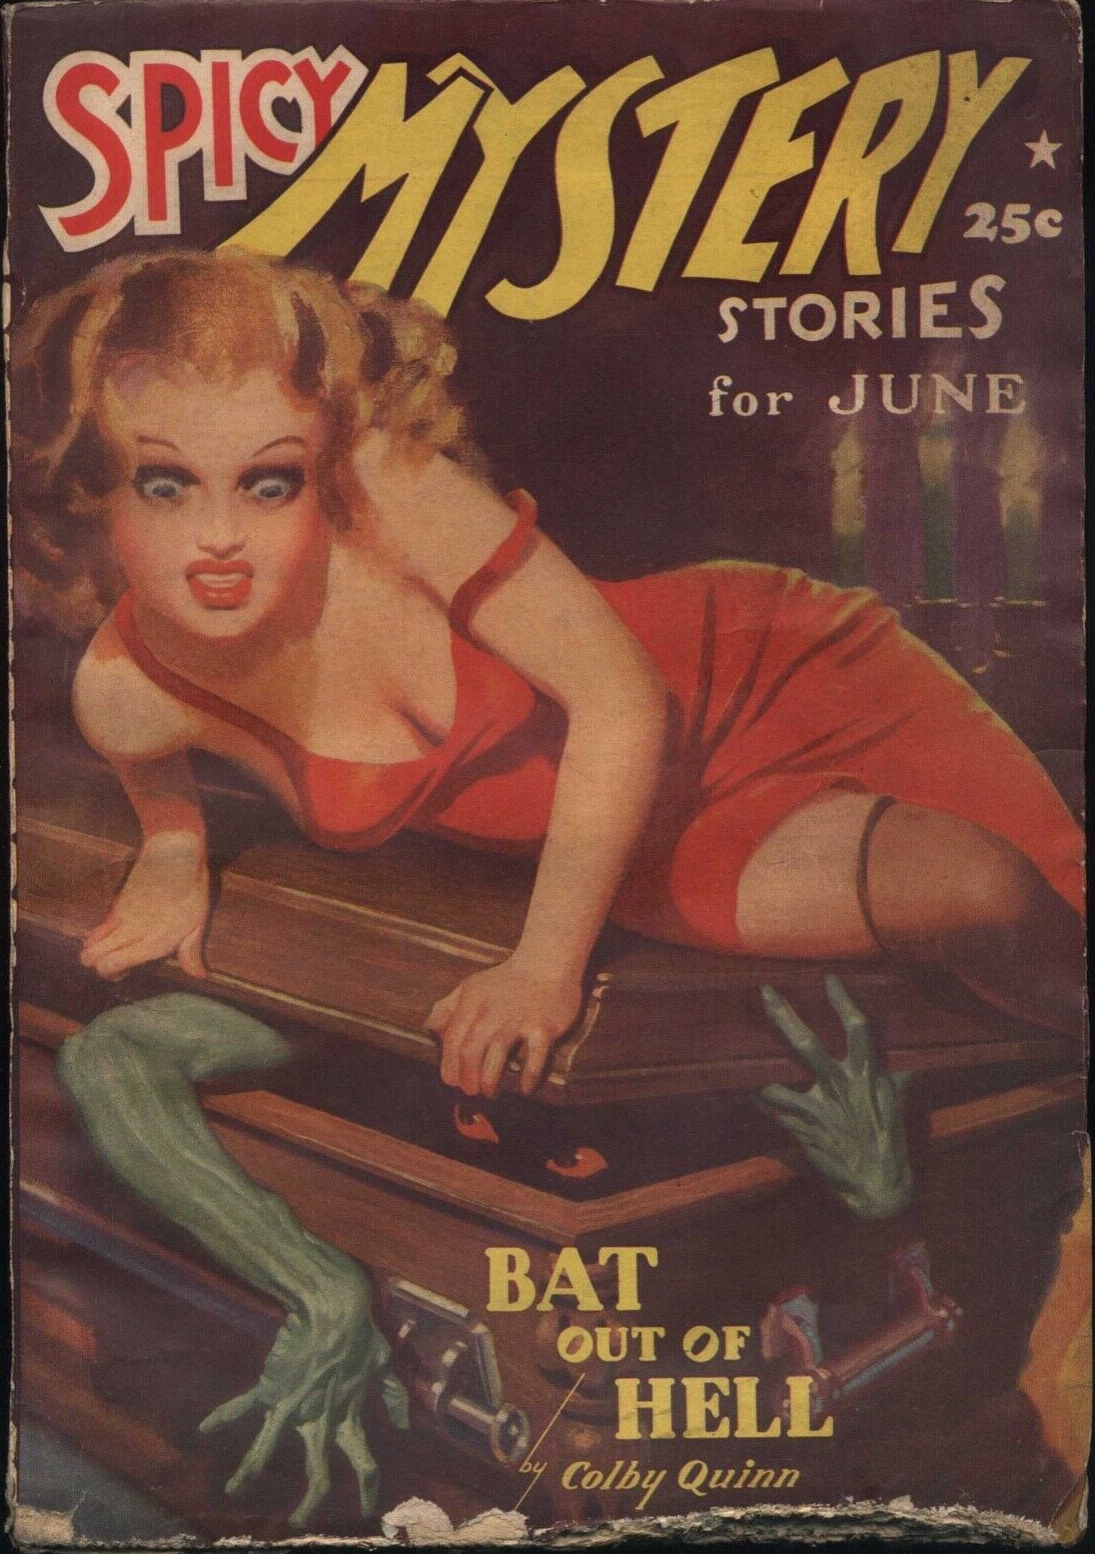 Spicy Mystery - June 1939